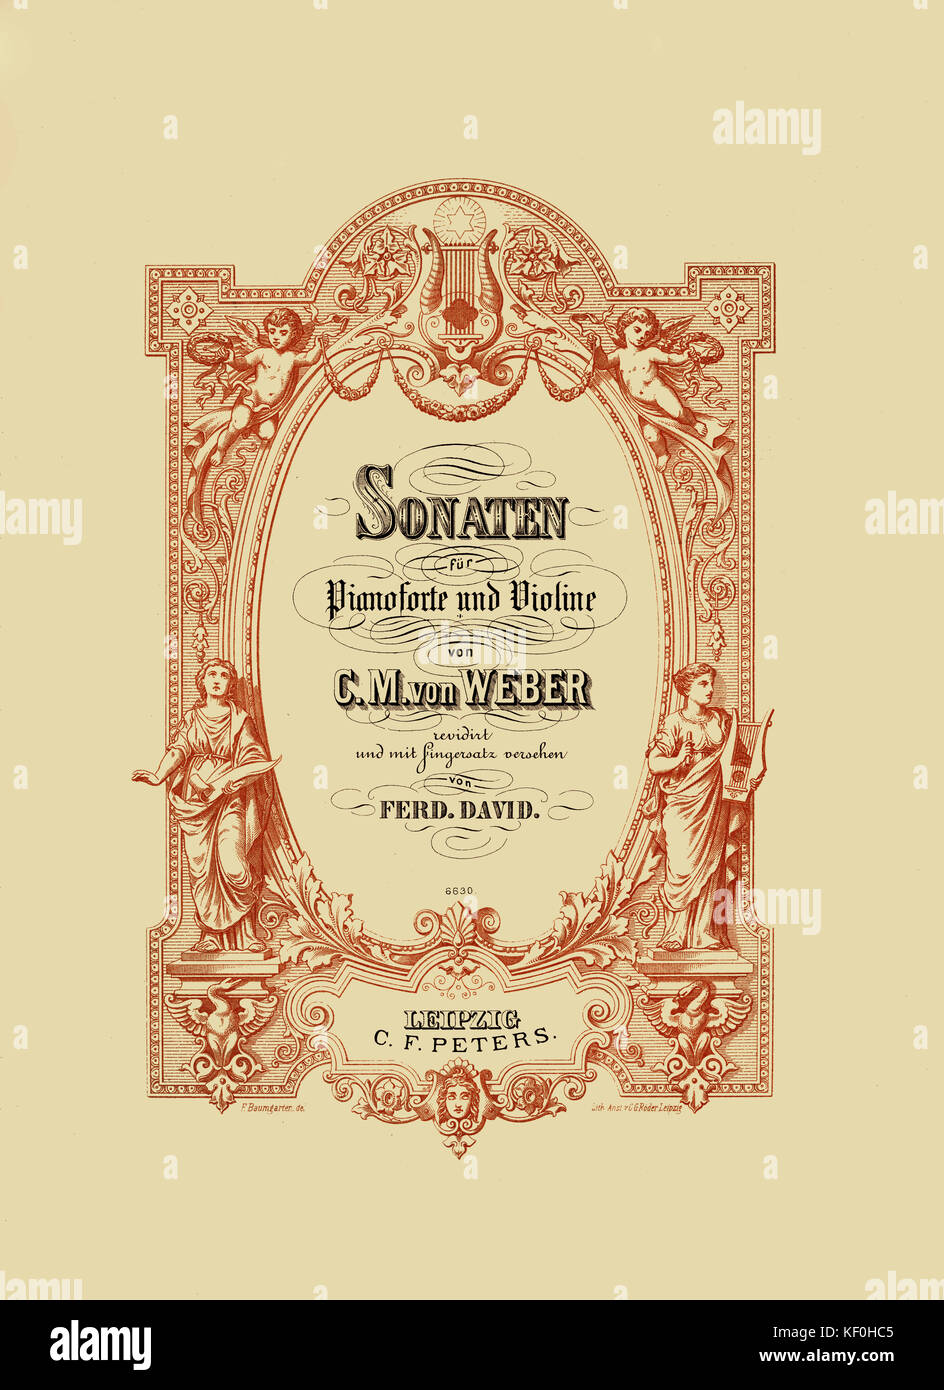 Carl Maria von Weber 's 'Sonaten fur Pianoforte und Violine'. (Sonatas for the piano and violin,  Ferdinand David).  Score cover, published by C. F. Peters, Leipzig, n.d.  German composer and conductor: 18 November 1786 - 5 June 1826. Stock Photo